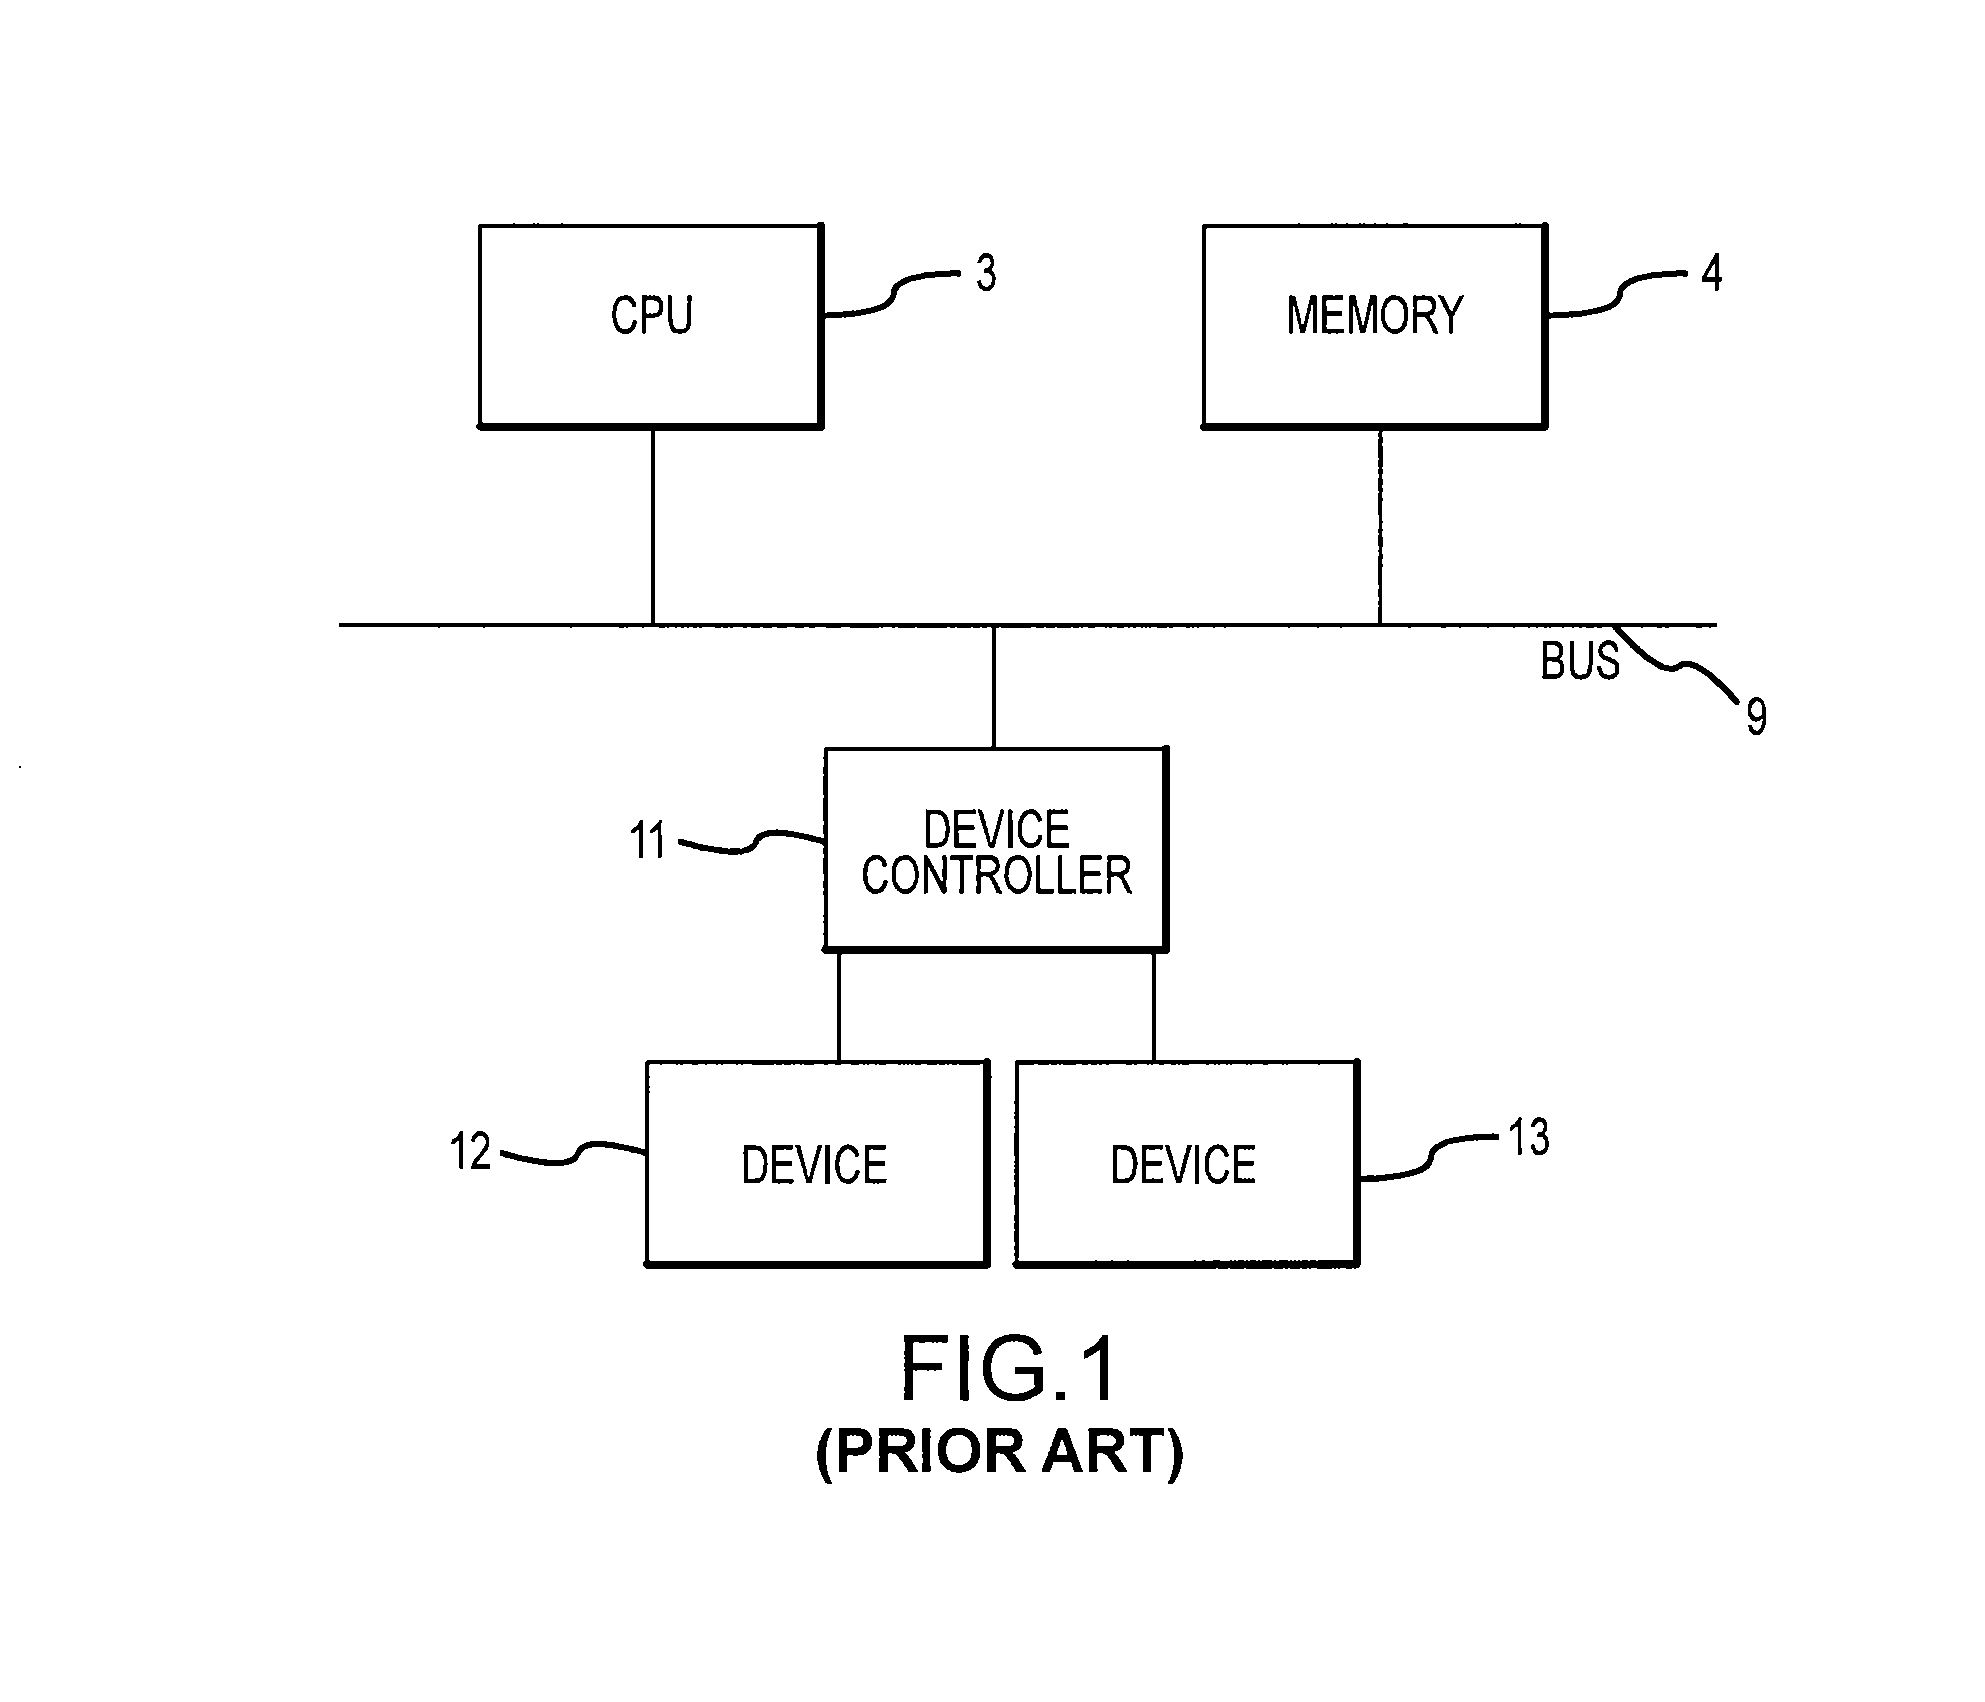 System using a single host to receive and redirect all file access commands for shared data storage device from other hosts on a network